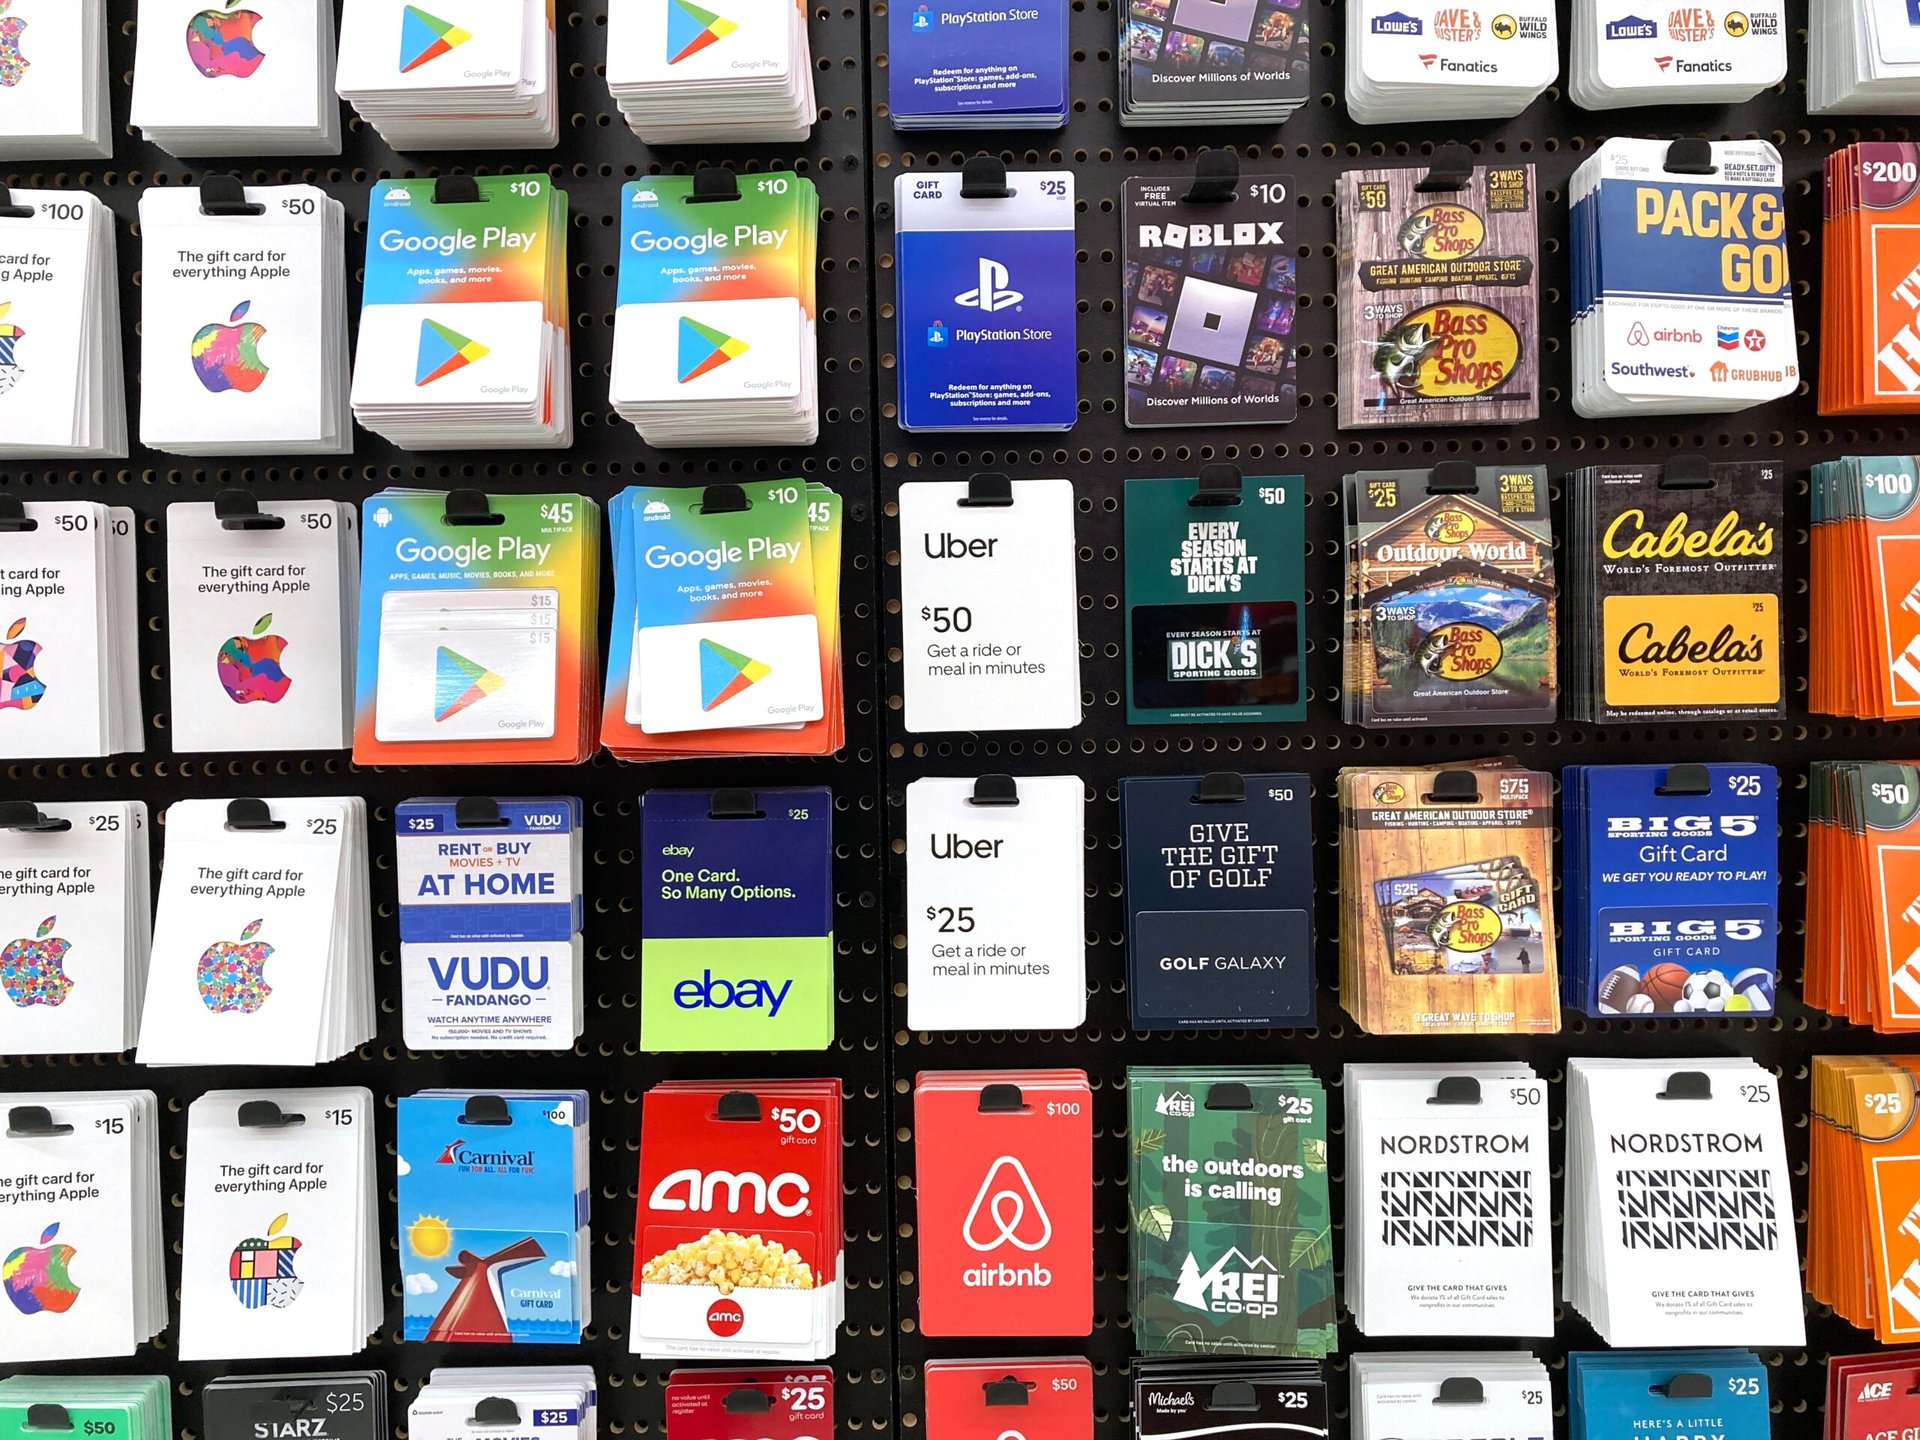 Top 10 Most Popular Gift Cards of 2023: Which is Best for Your